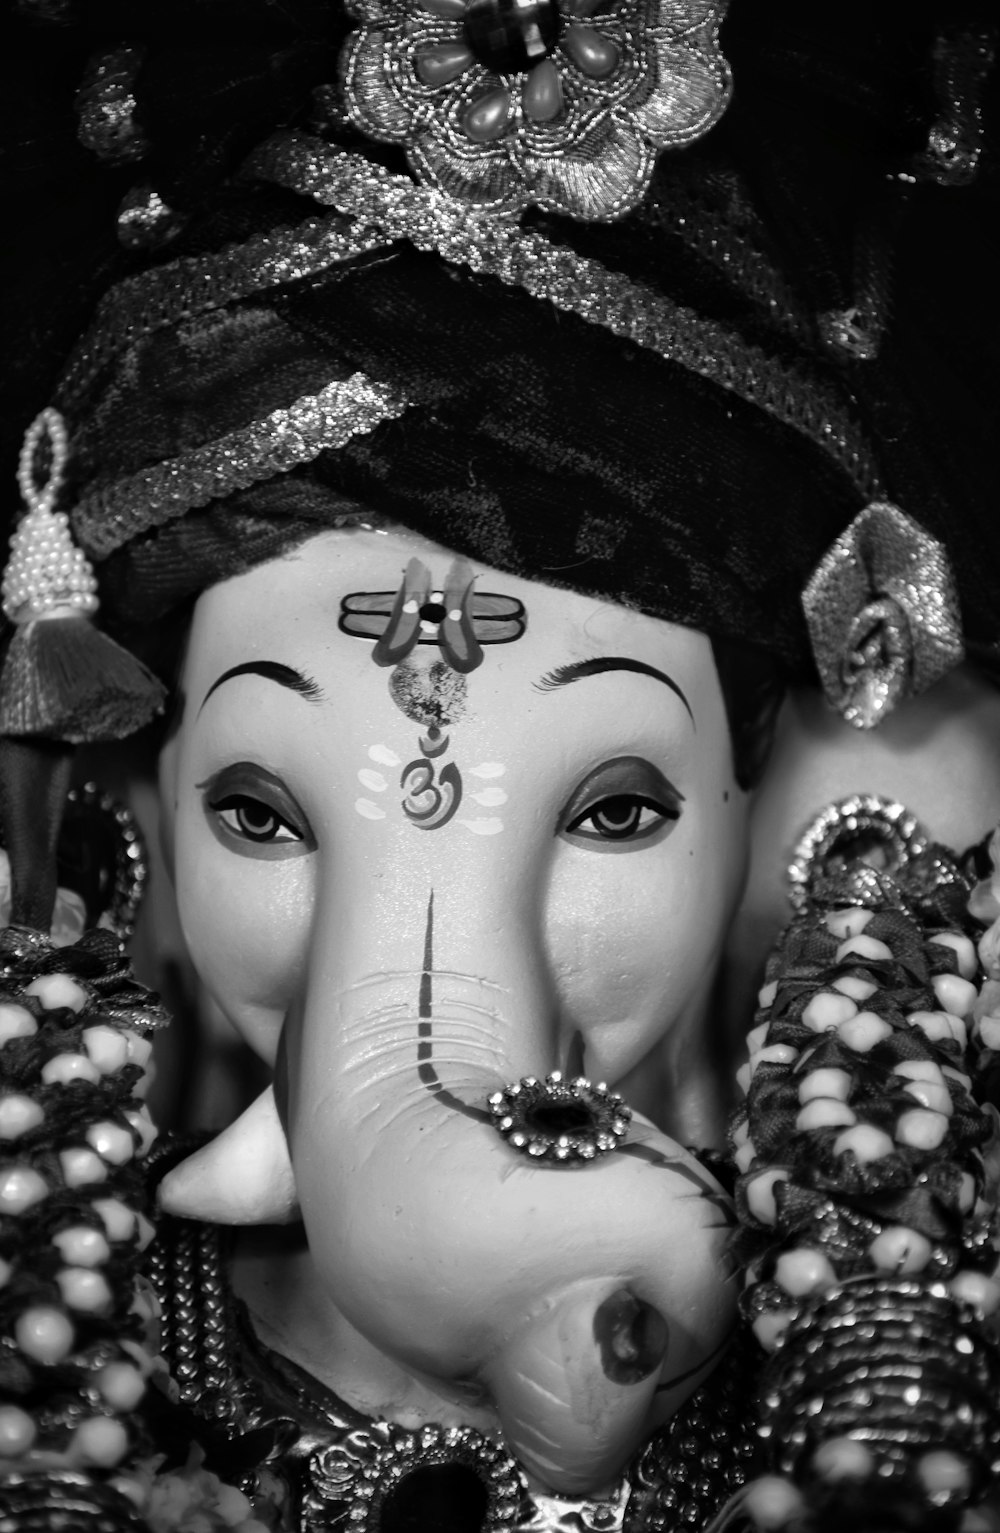 500 Ganpati Pictures Hd Download Free Images On Unsplash Download, share or upload your own one! 500 ganpati pictures hd download